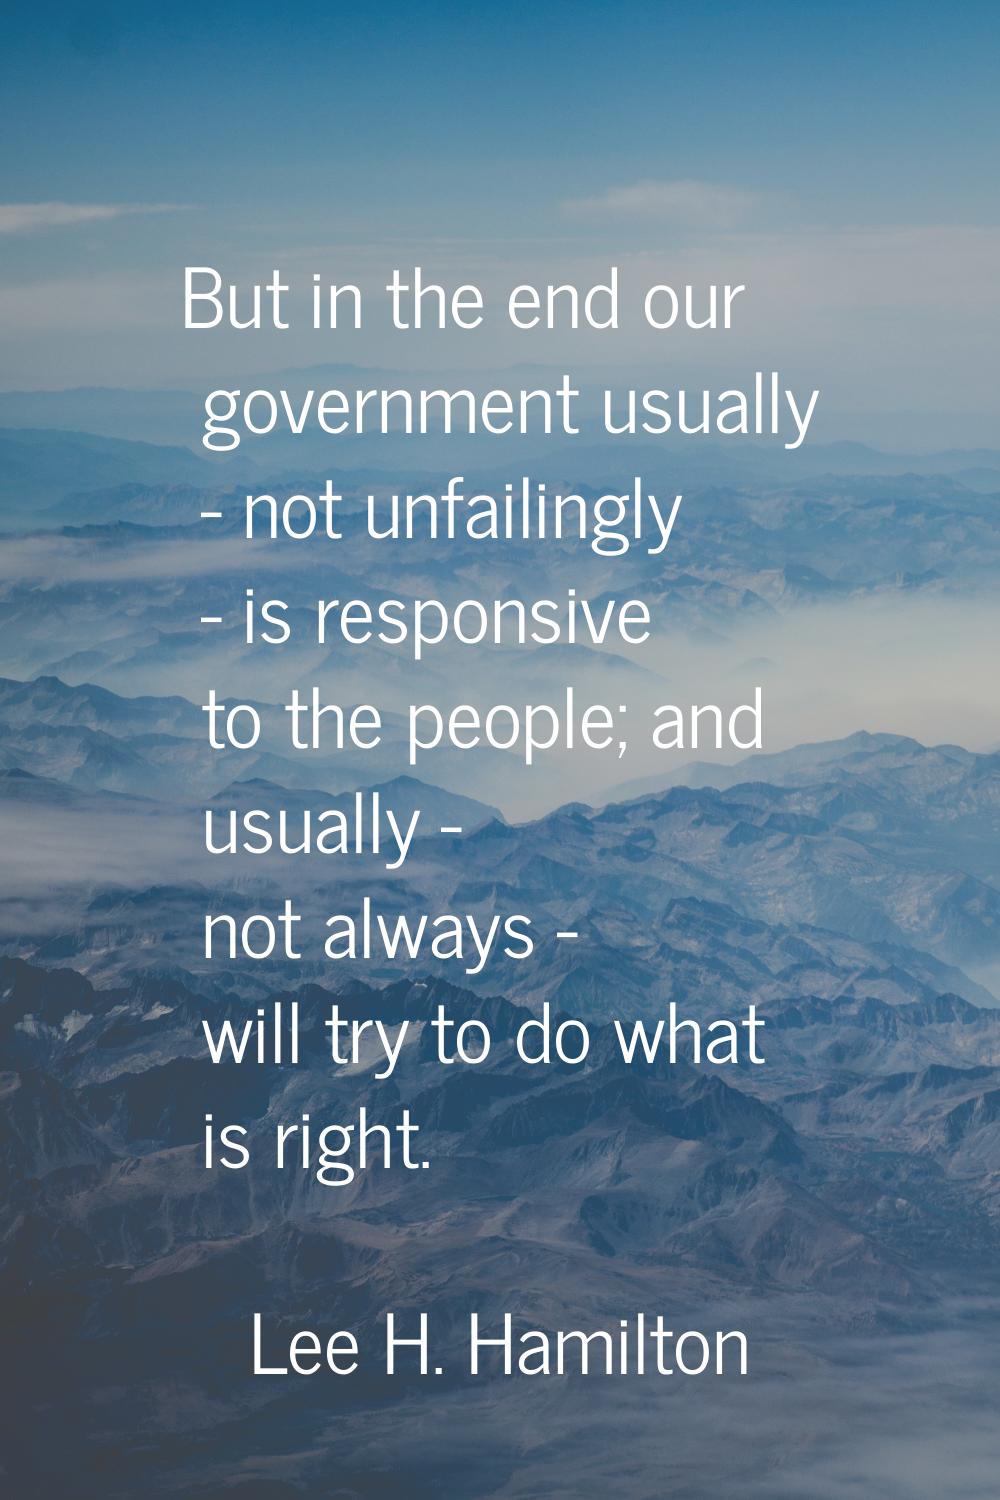 But in the end our government usually - not unfailingly - is responsive to the people; and usually 